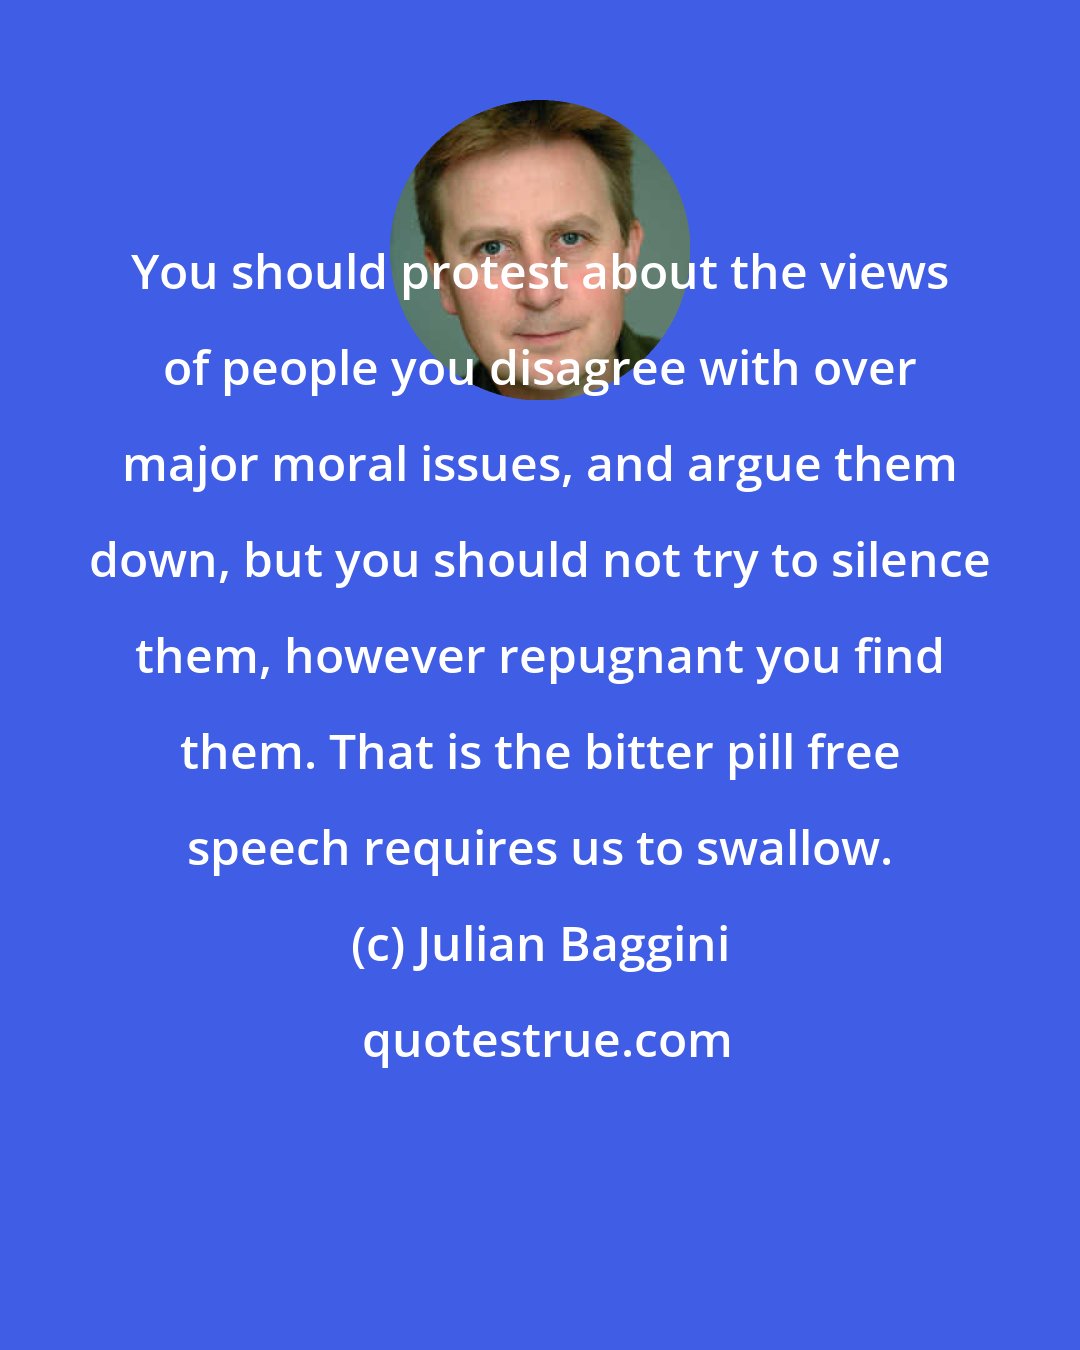 Julian Baggini: You should protest about the views of people you disagree with over major moral issues, and argue them down, but you should not try to silence them, however repugnant you find them. That is the bitter pill free speech requires us to swallow.